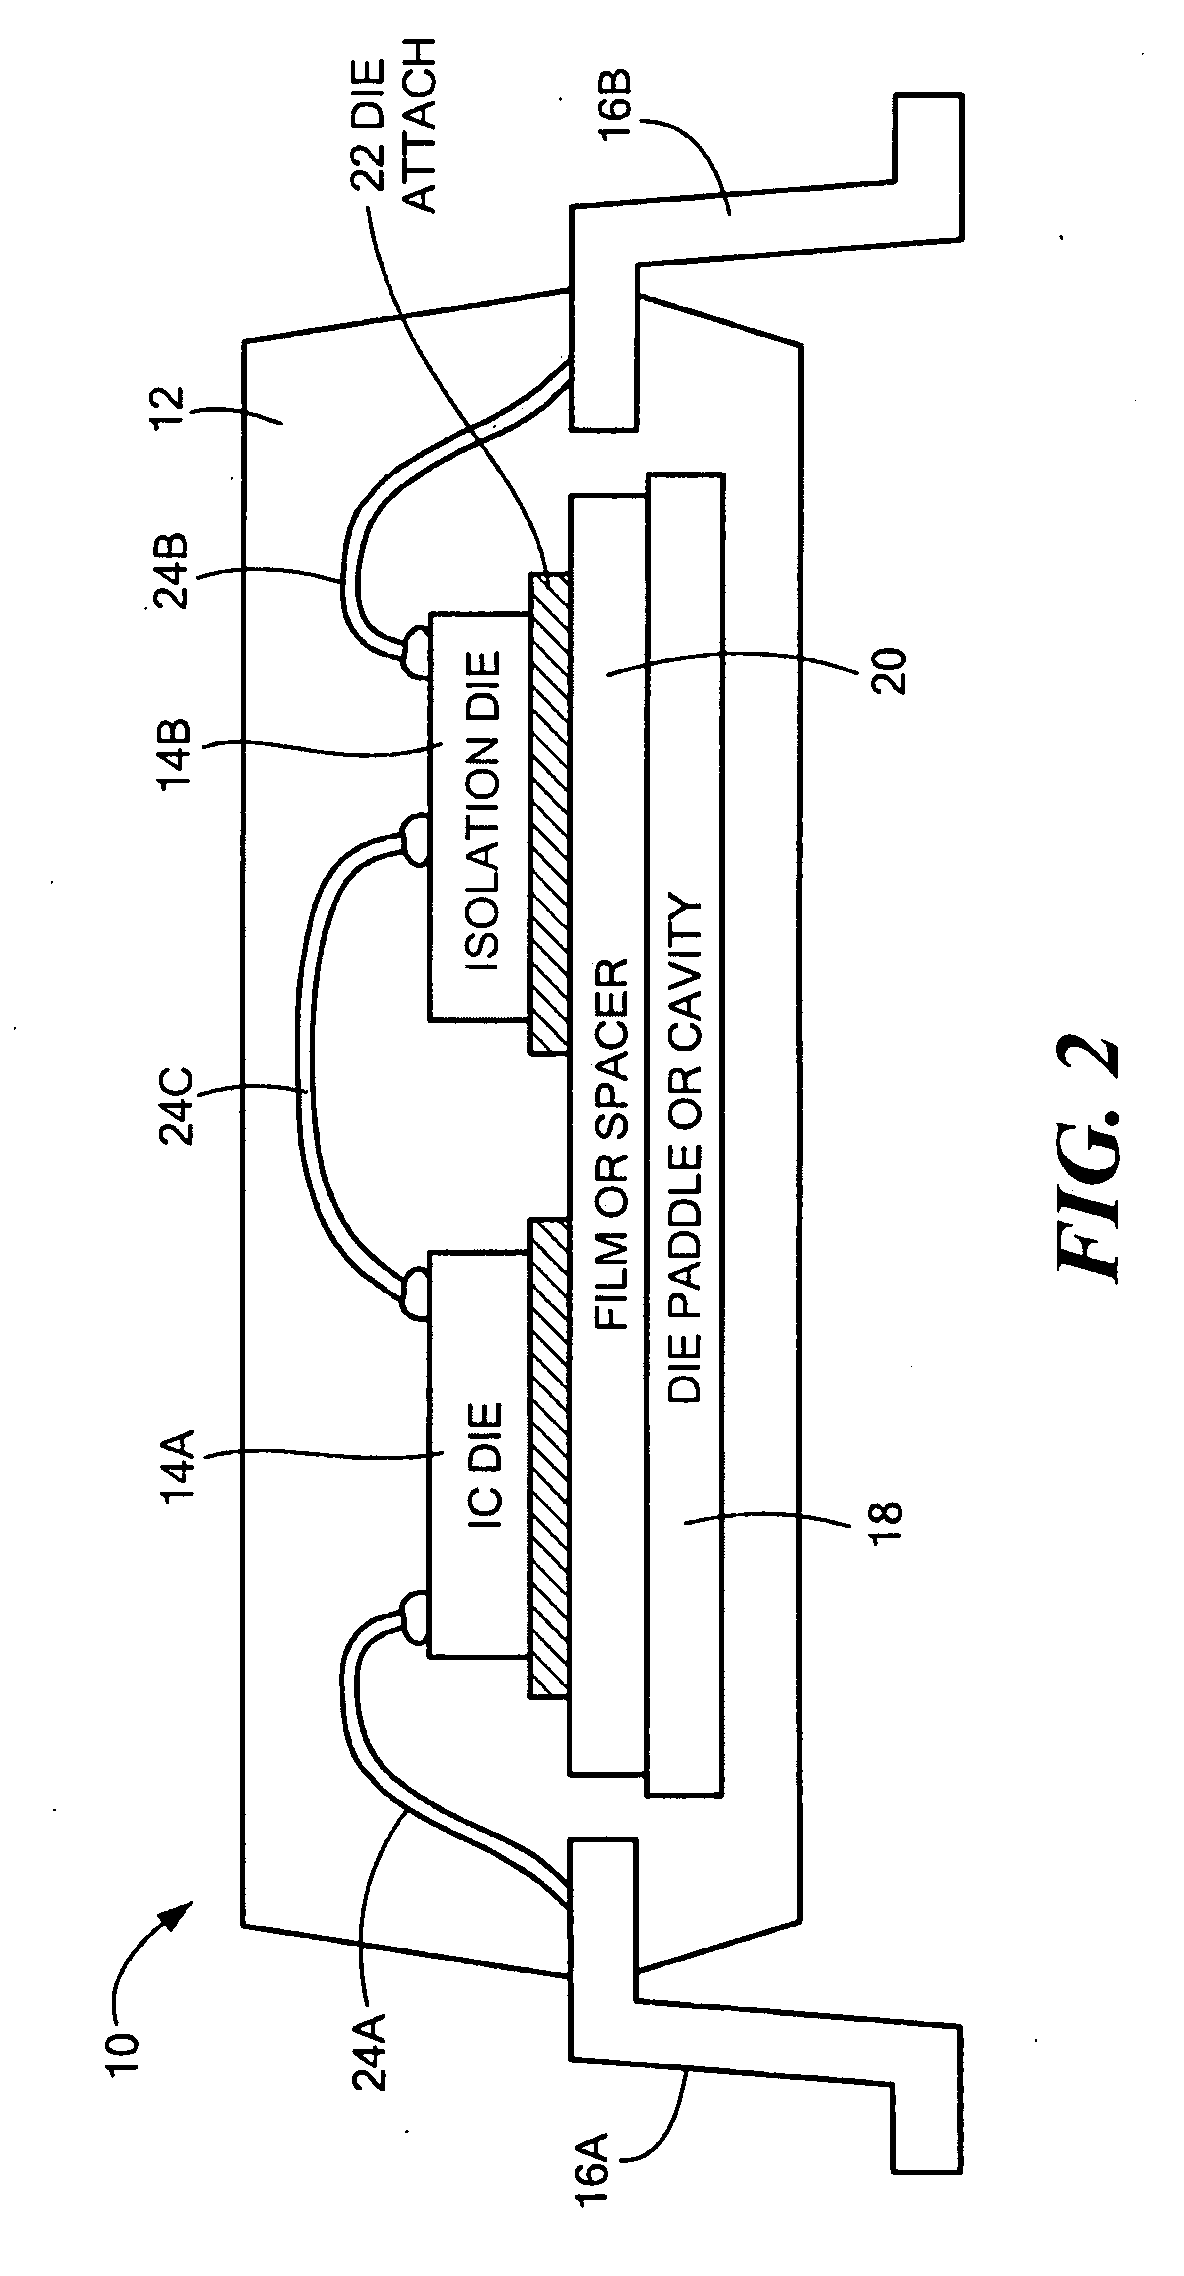 Packaged Microchip with Spacer for Mitigating Electrical Leakage Between Components